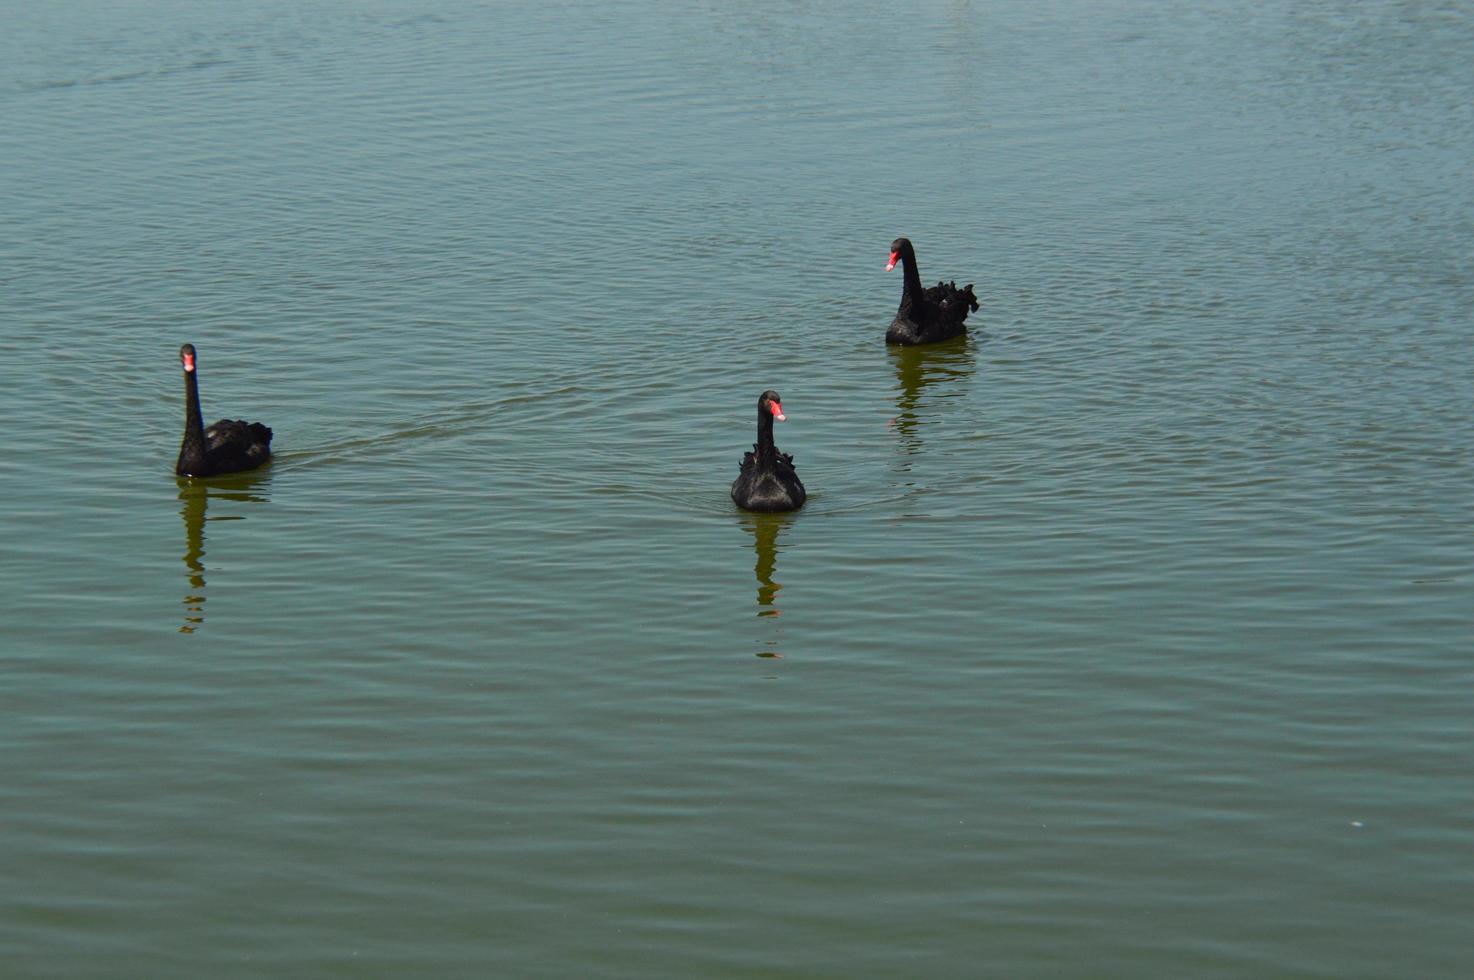 Black swans swim in the water on the lake photo